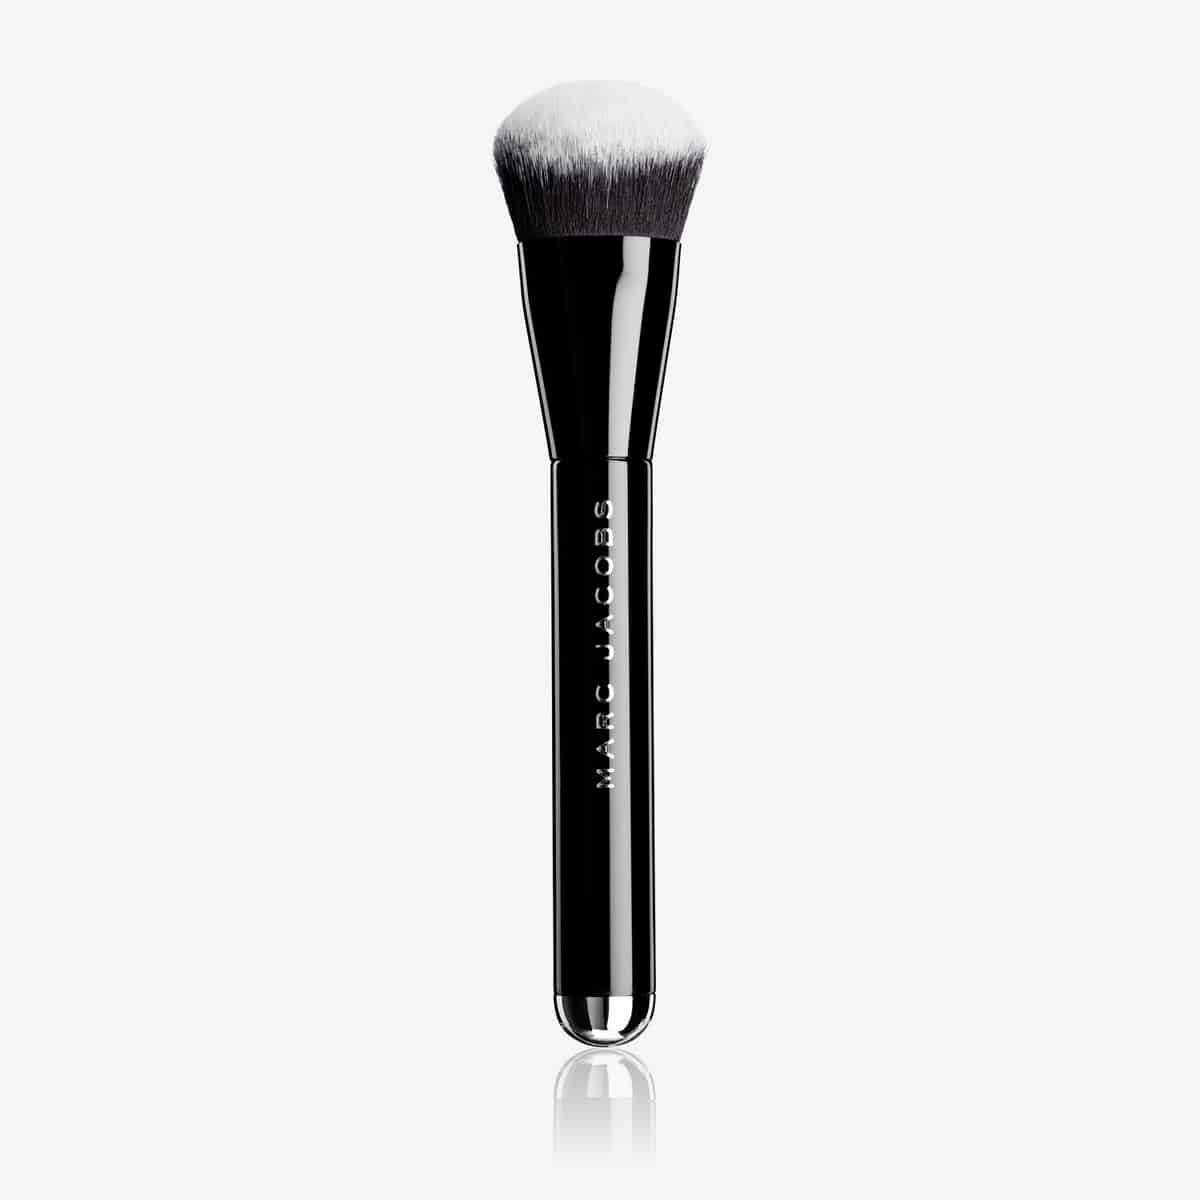 Marc Jacobs Beauty The Face II-Sculpting Foundation Brush 2